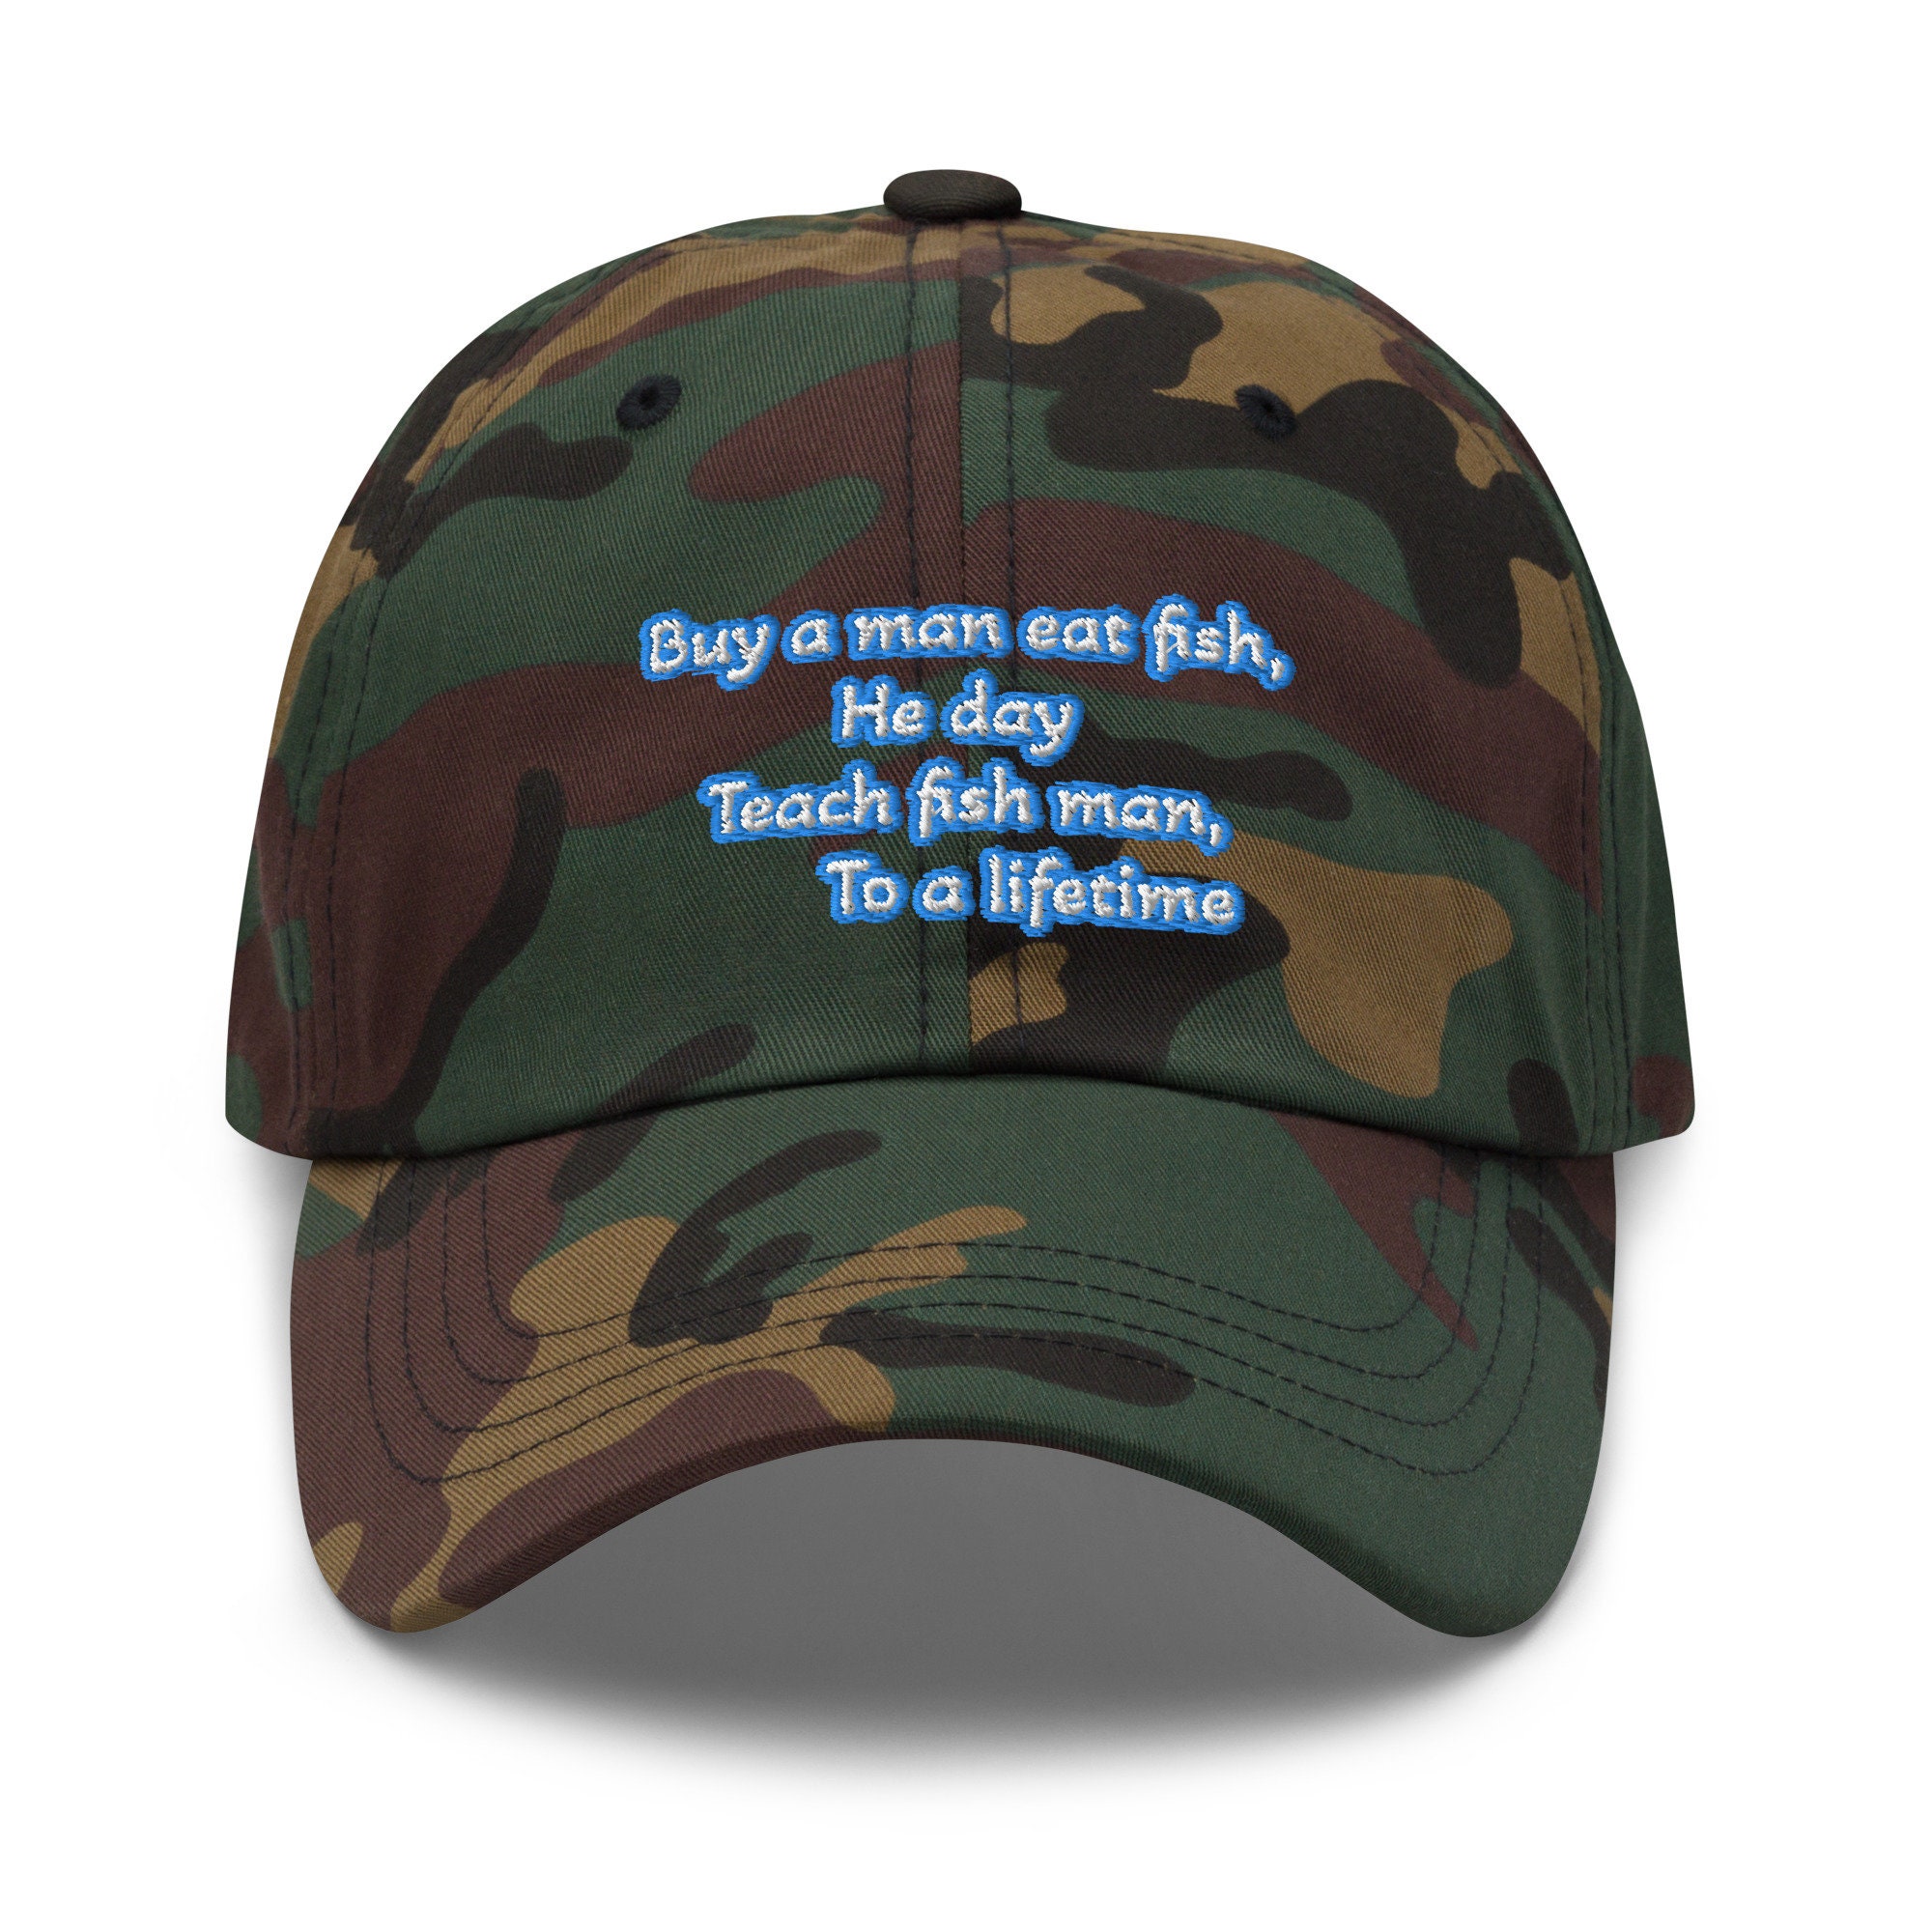 Buy A Man Eat Fish He Day Teach A Man to A Lifetime - (meme Quote ) Embroidered Baseball unisex Dad Hat